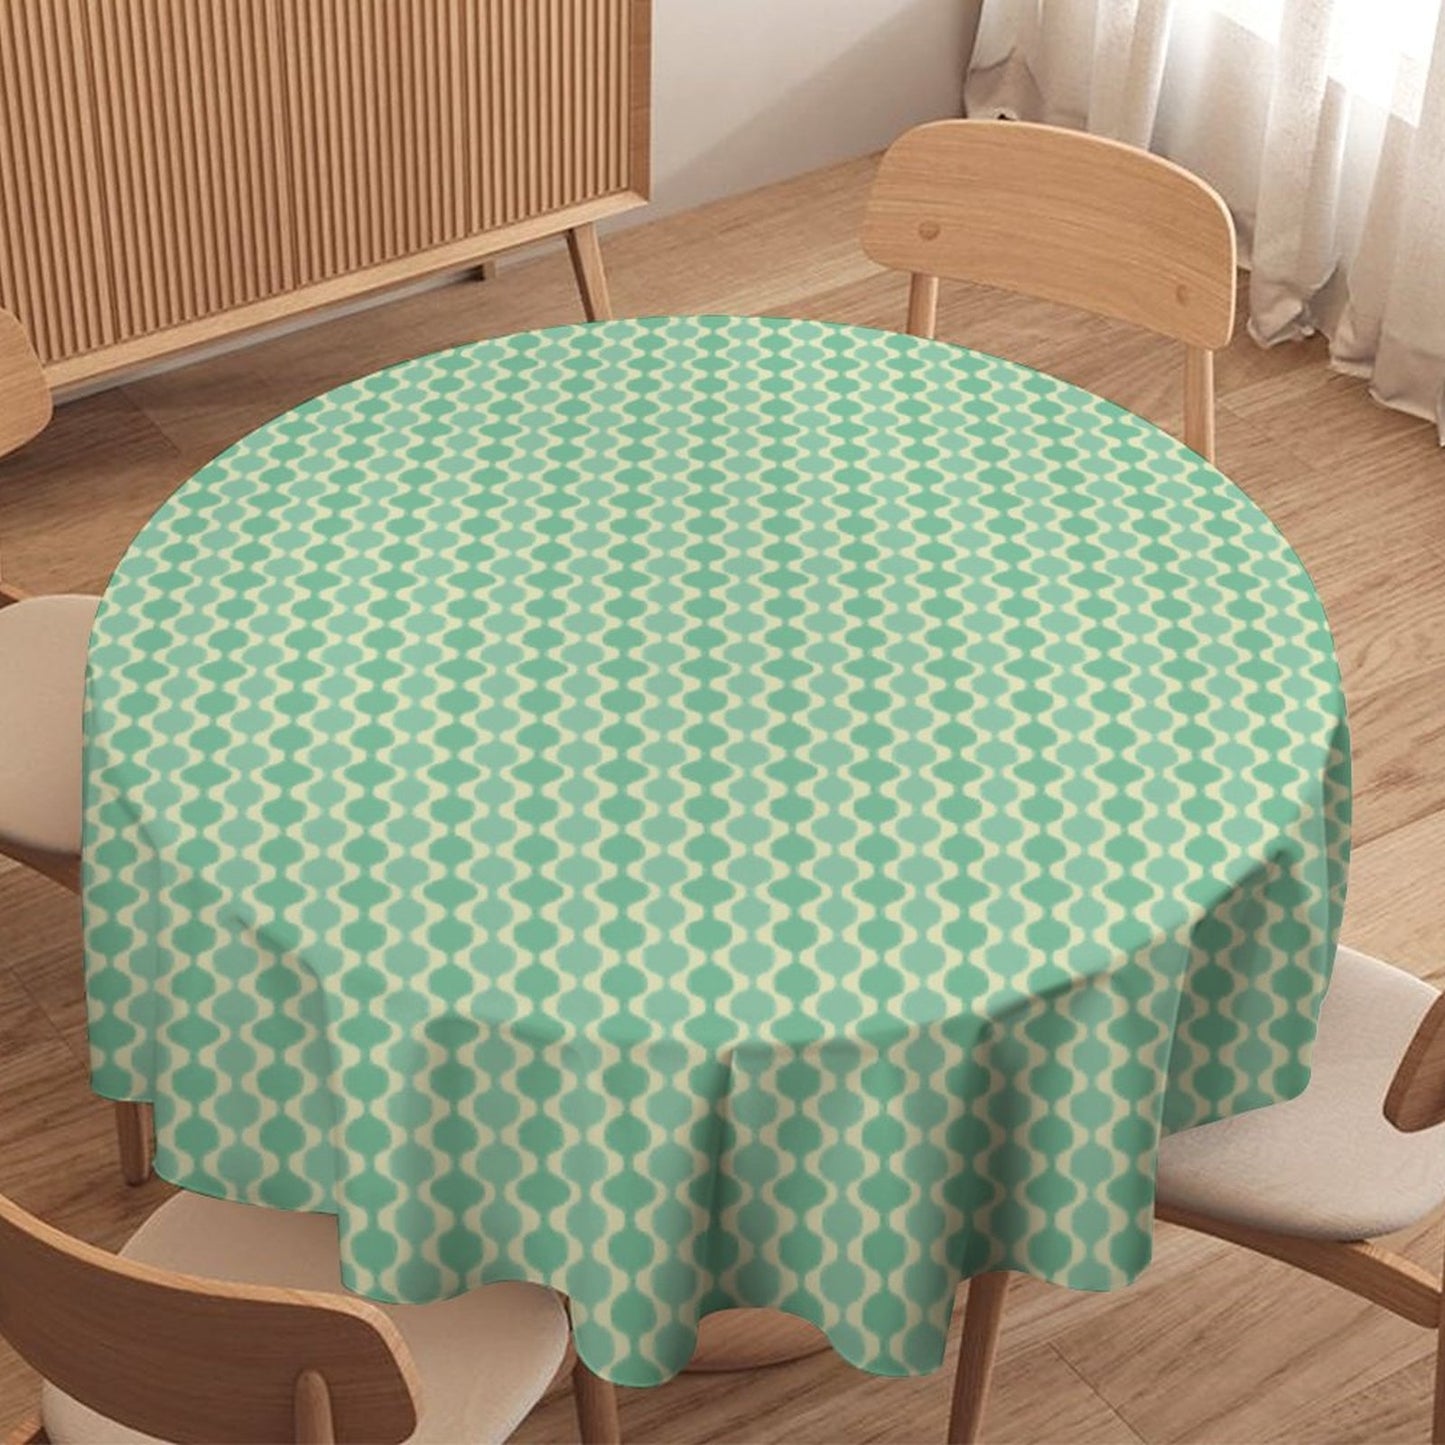 MCM Balusters | Round Tablecloth for Round Table